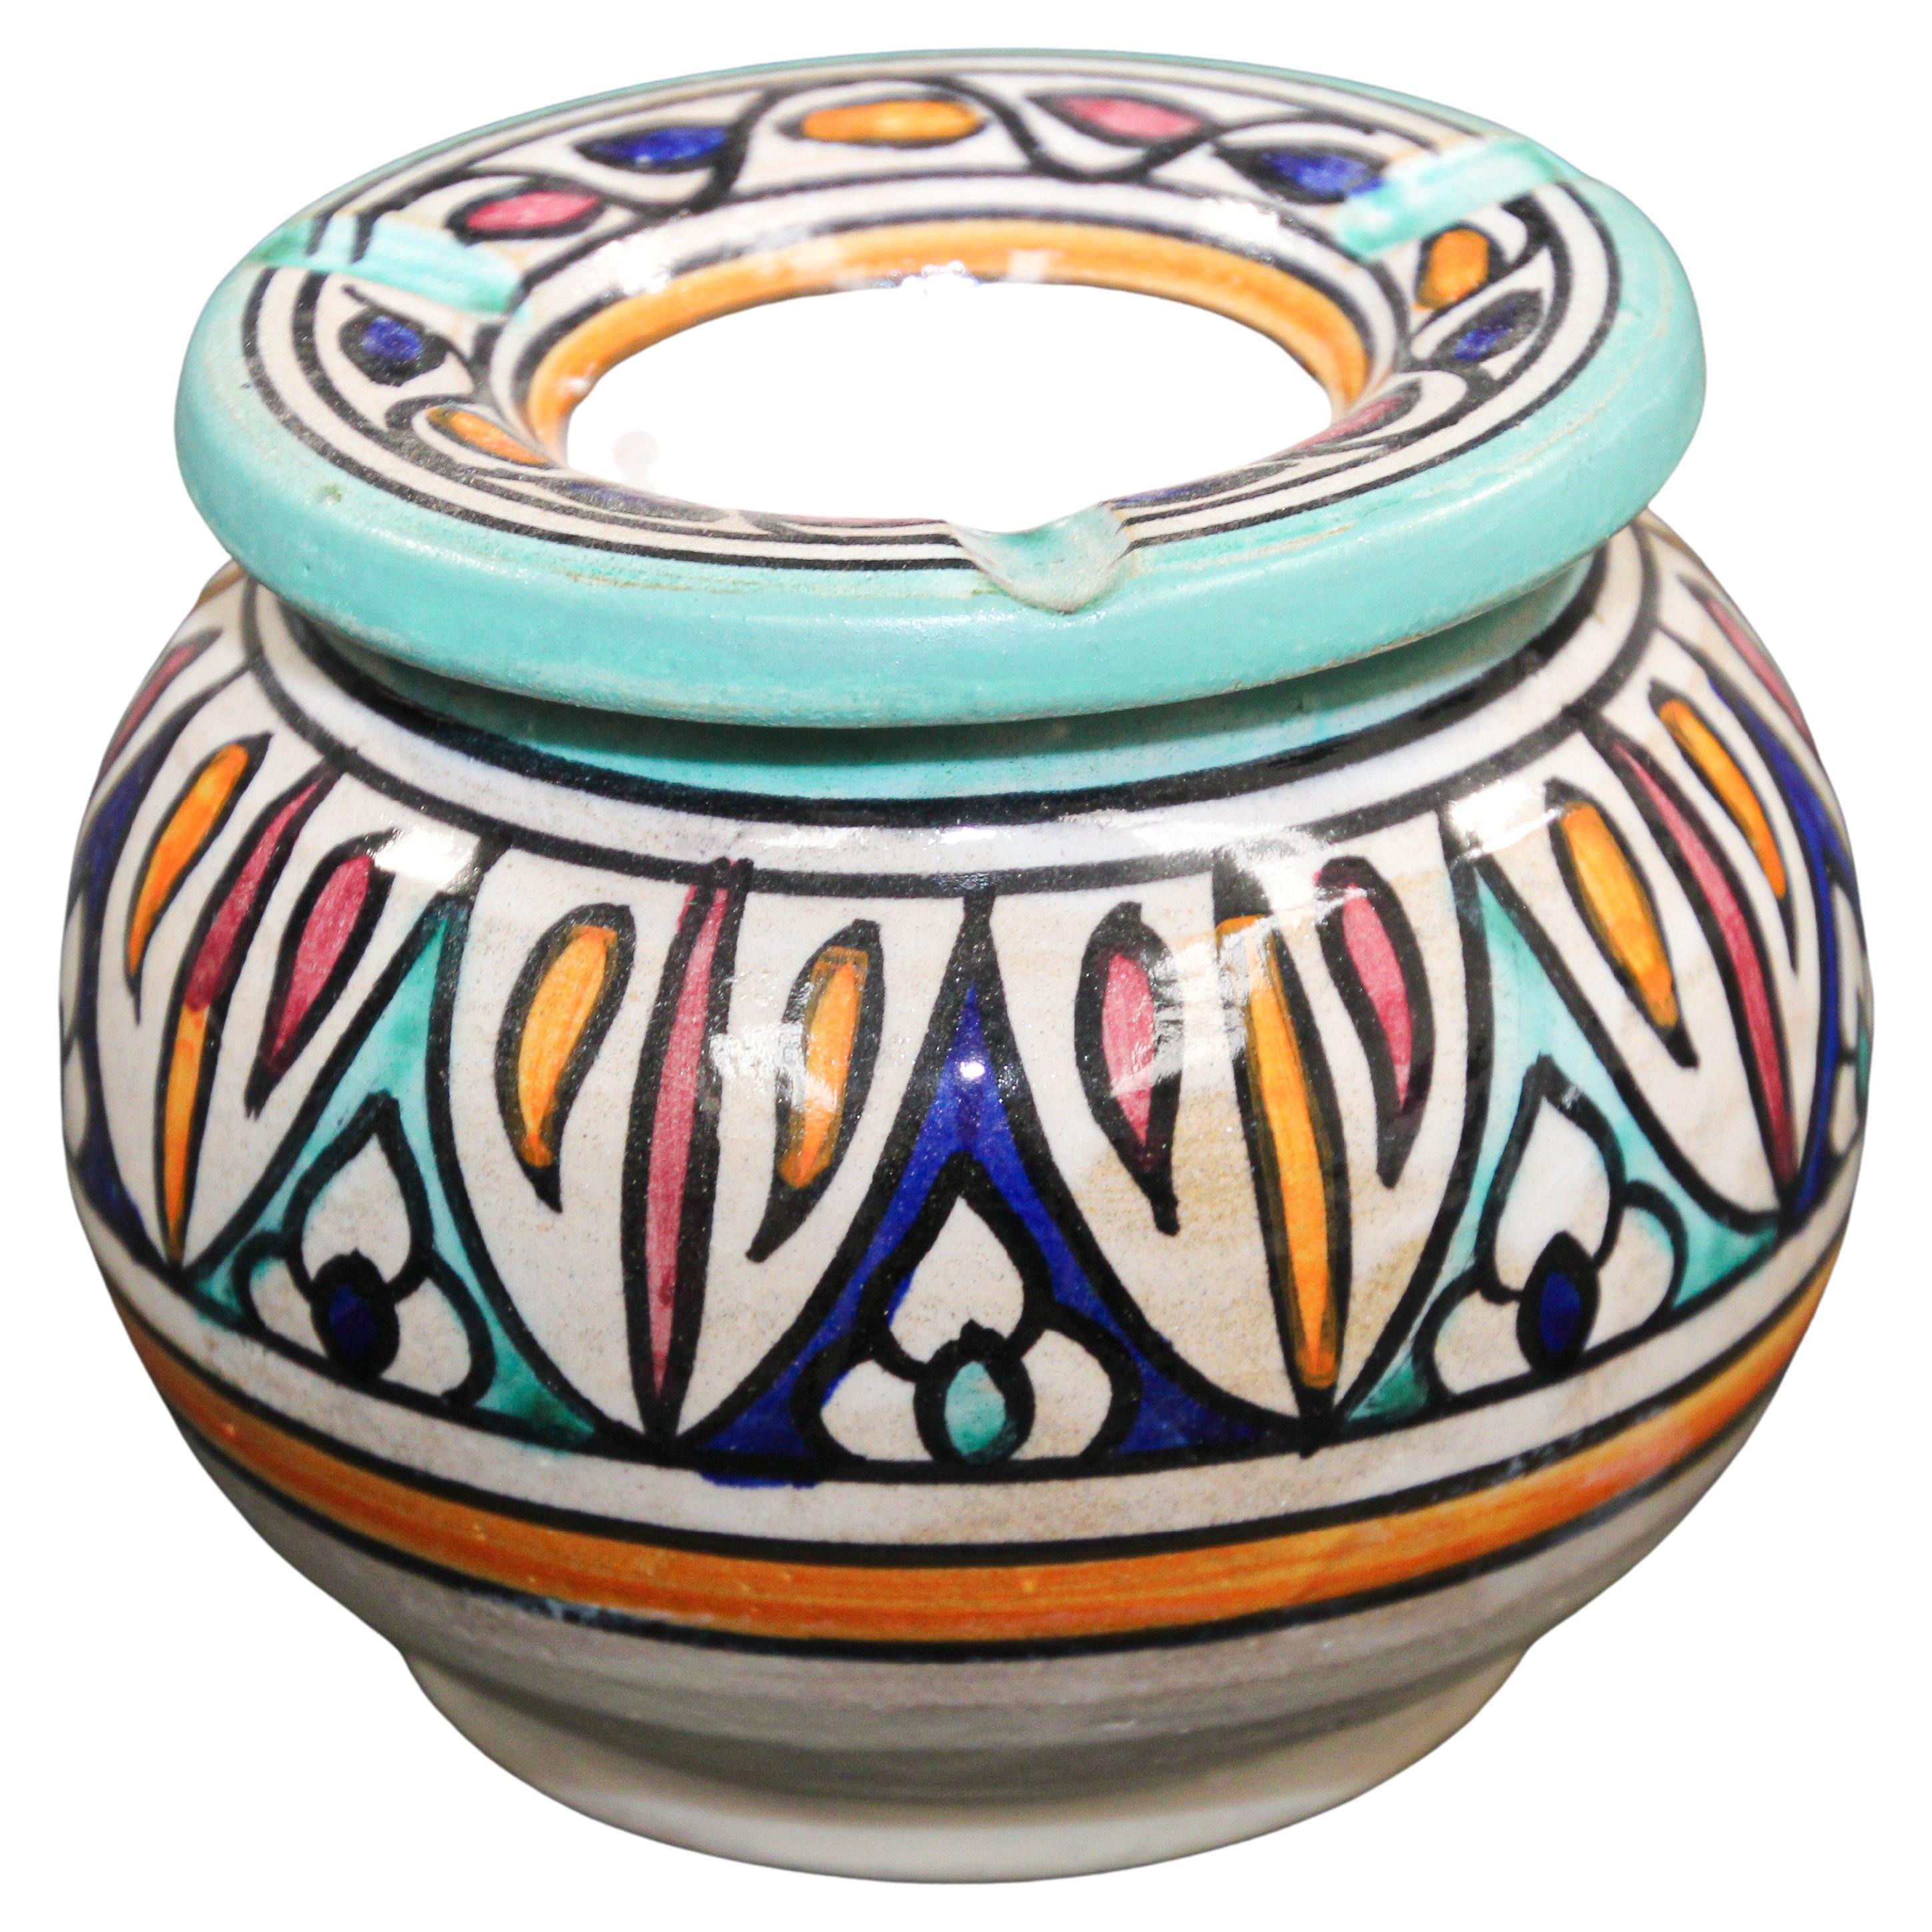 Vintage Moroccan covered hand painted ceramic ashtray.
Handcrafted Moroccan ceramic covered ash receiver.
This covered medium size ashtray could be used indoor and outdoor.
If used indoor the cover will keep the smell of ashes in.
Hand painted